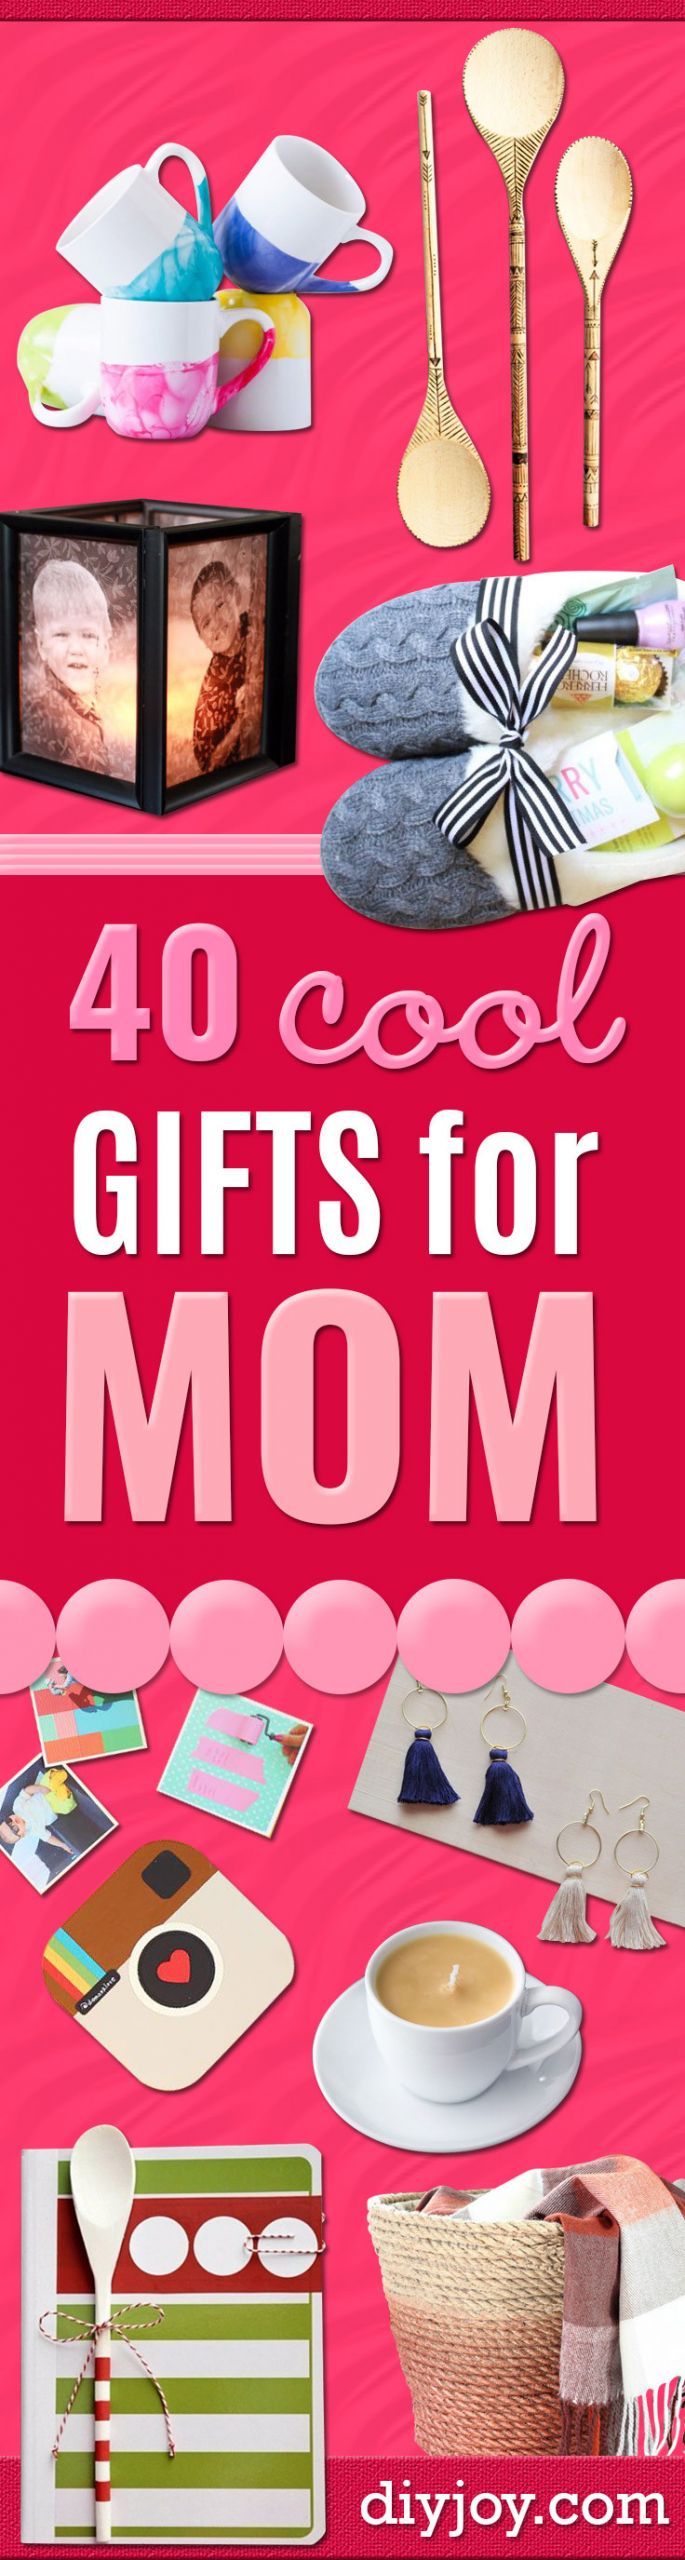 DIY Gifts For Mum Christmas
 40 Coolest Gifts To Make for Mom